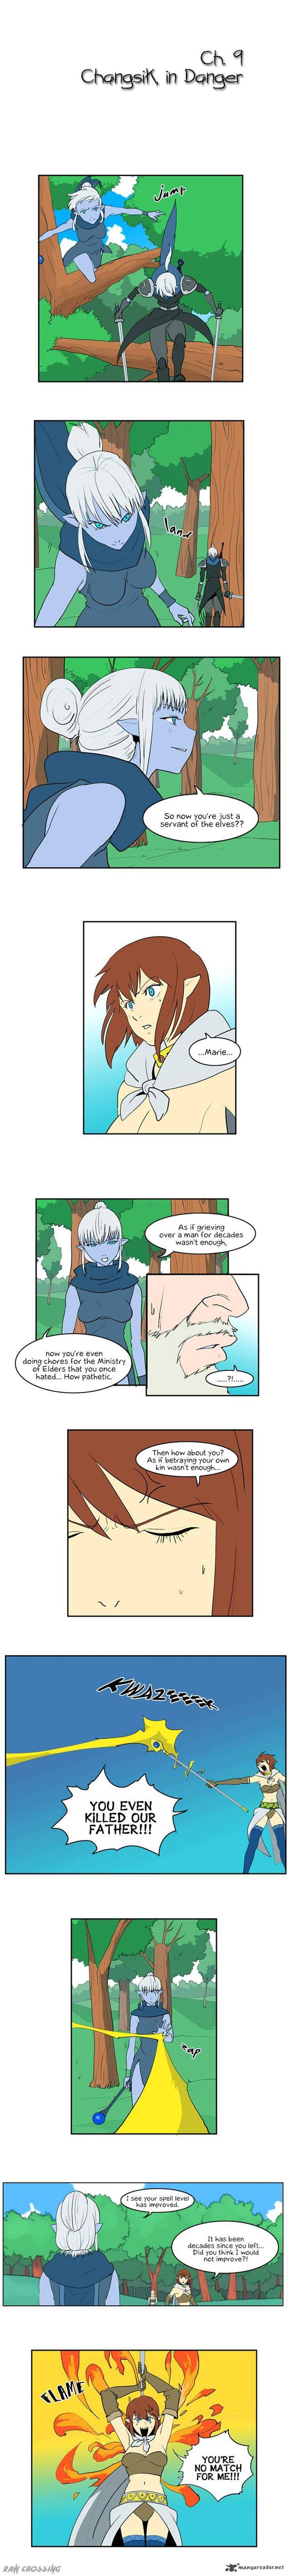 Dragons Son Changsik Chapter 9 Page 1